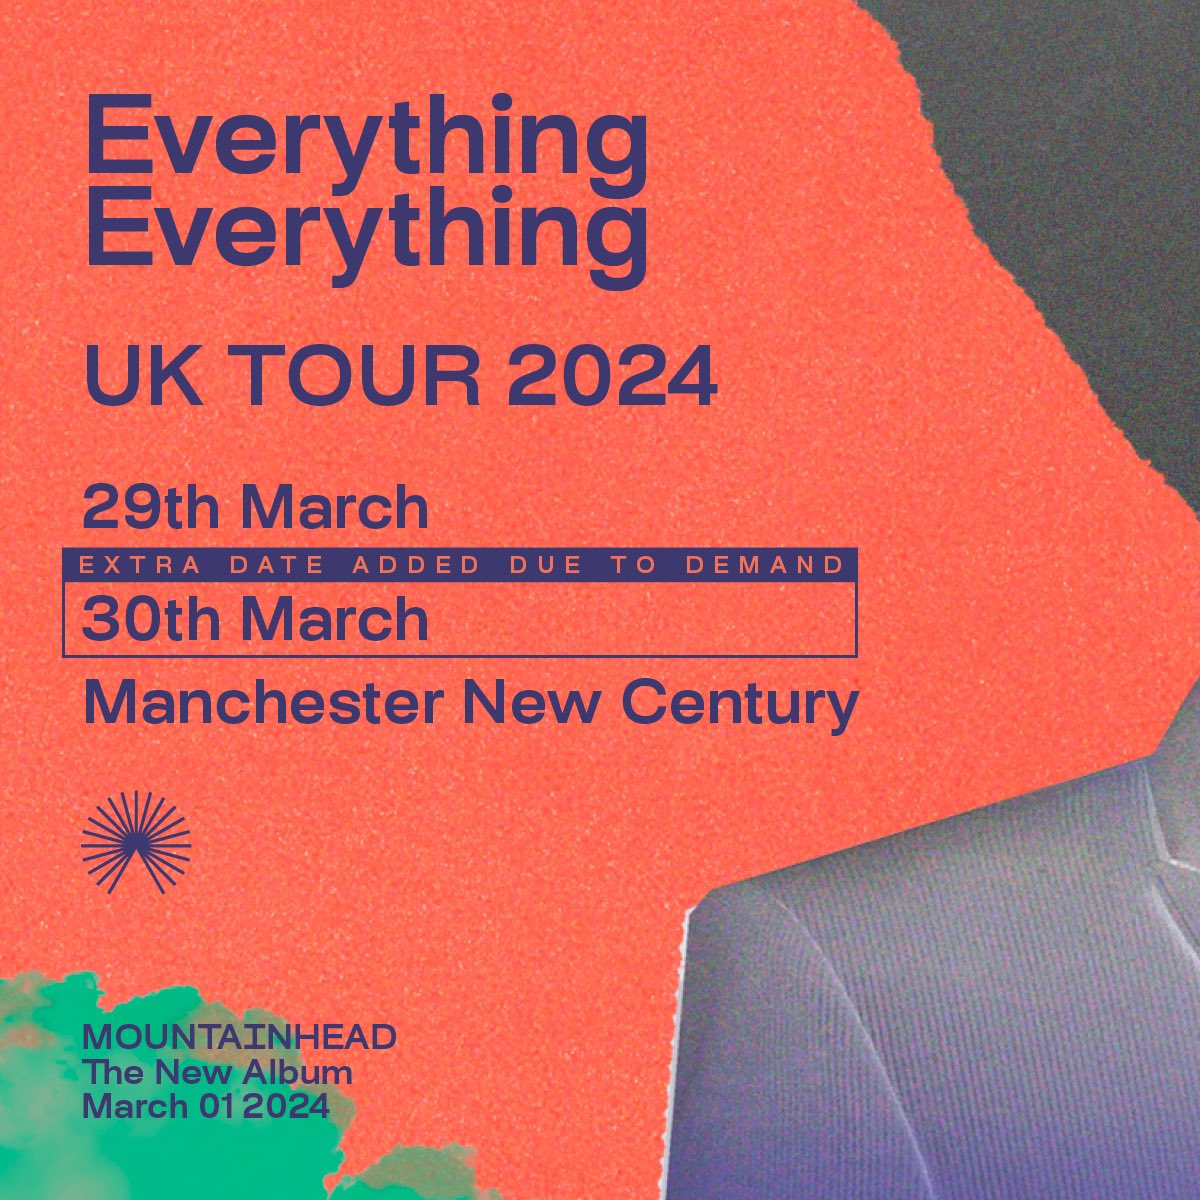 Due to phenomenal demand in Manchester we've added a second date at New Century Hall on Saturday 30th March - tickets onsale now, be quick! tix.to/EE2024